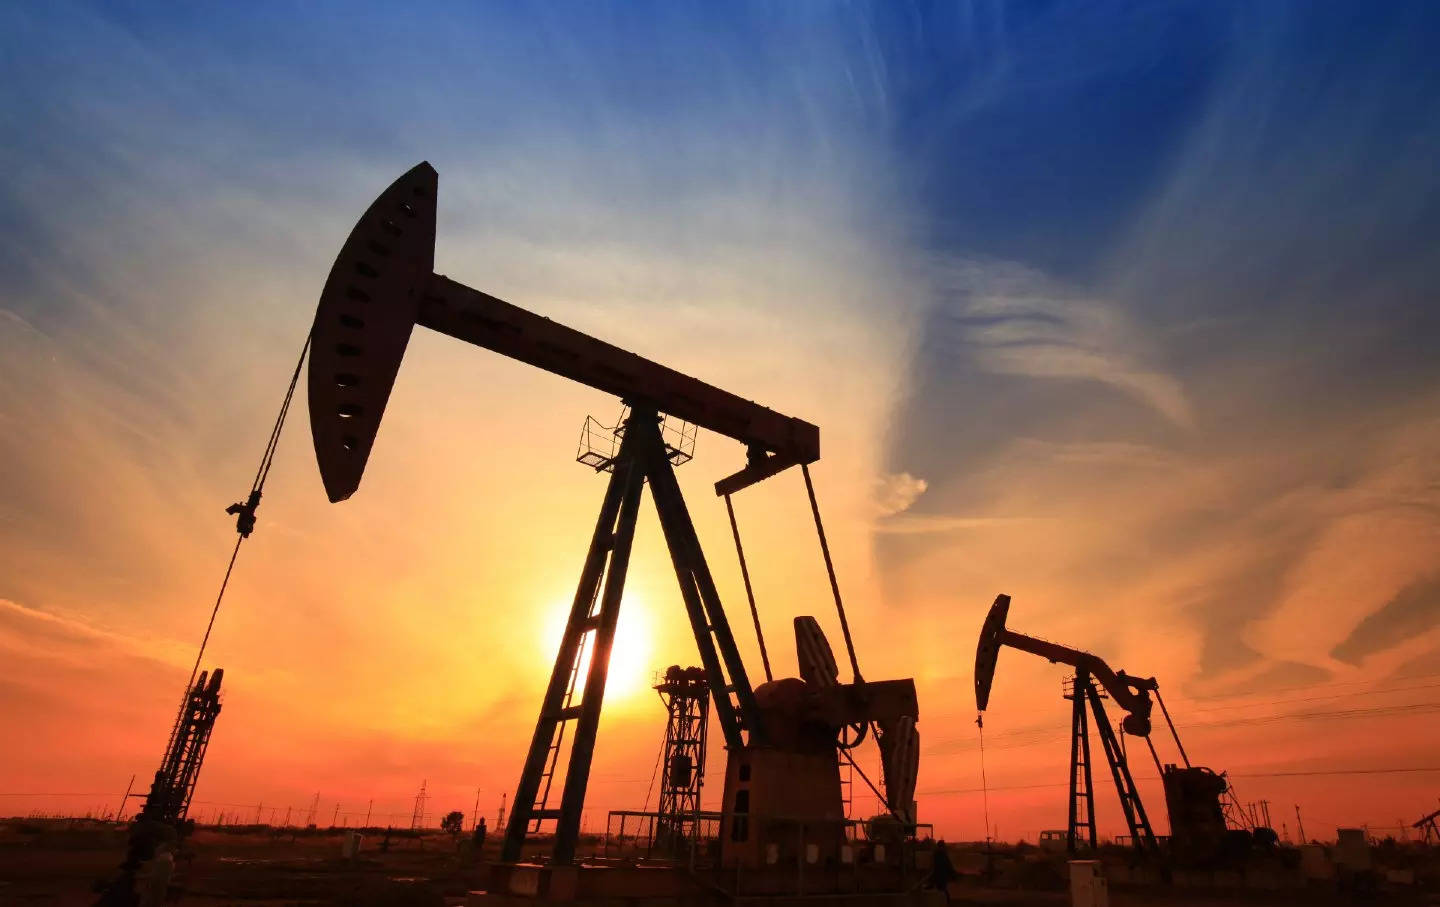  Traders will be watching out for weekly U.S. oil inventory data, first from the American Petroleum Institute on Tuesday and then the Energy Information Administration on Wednesday.